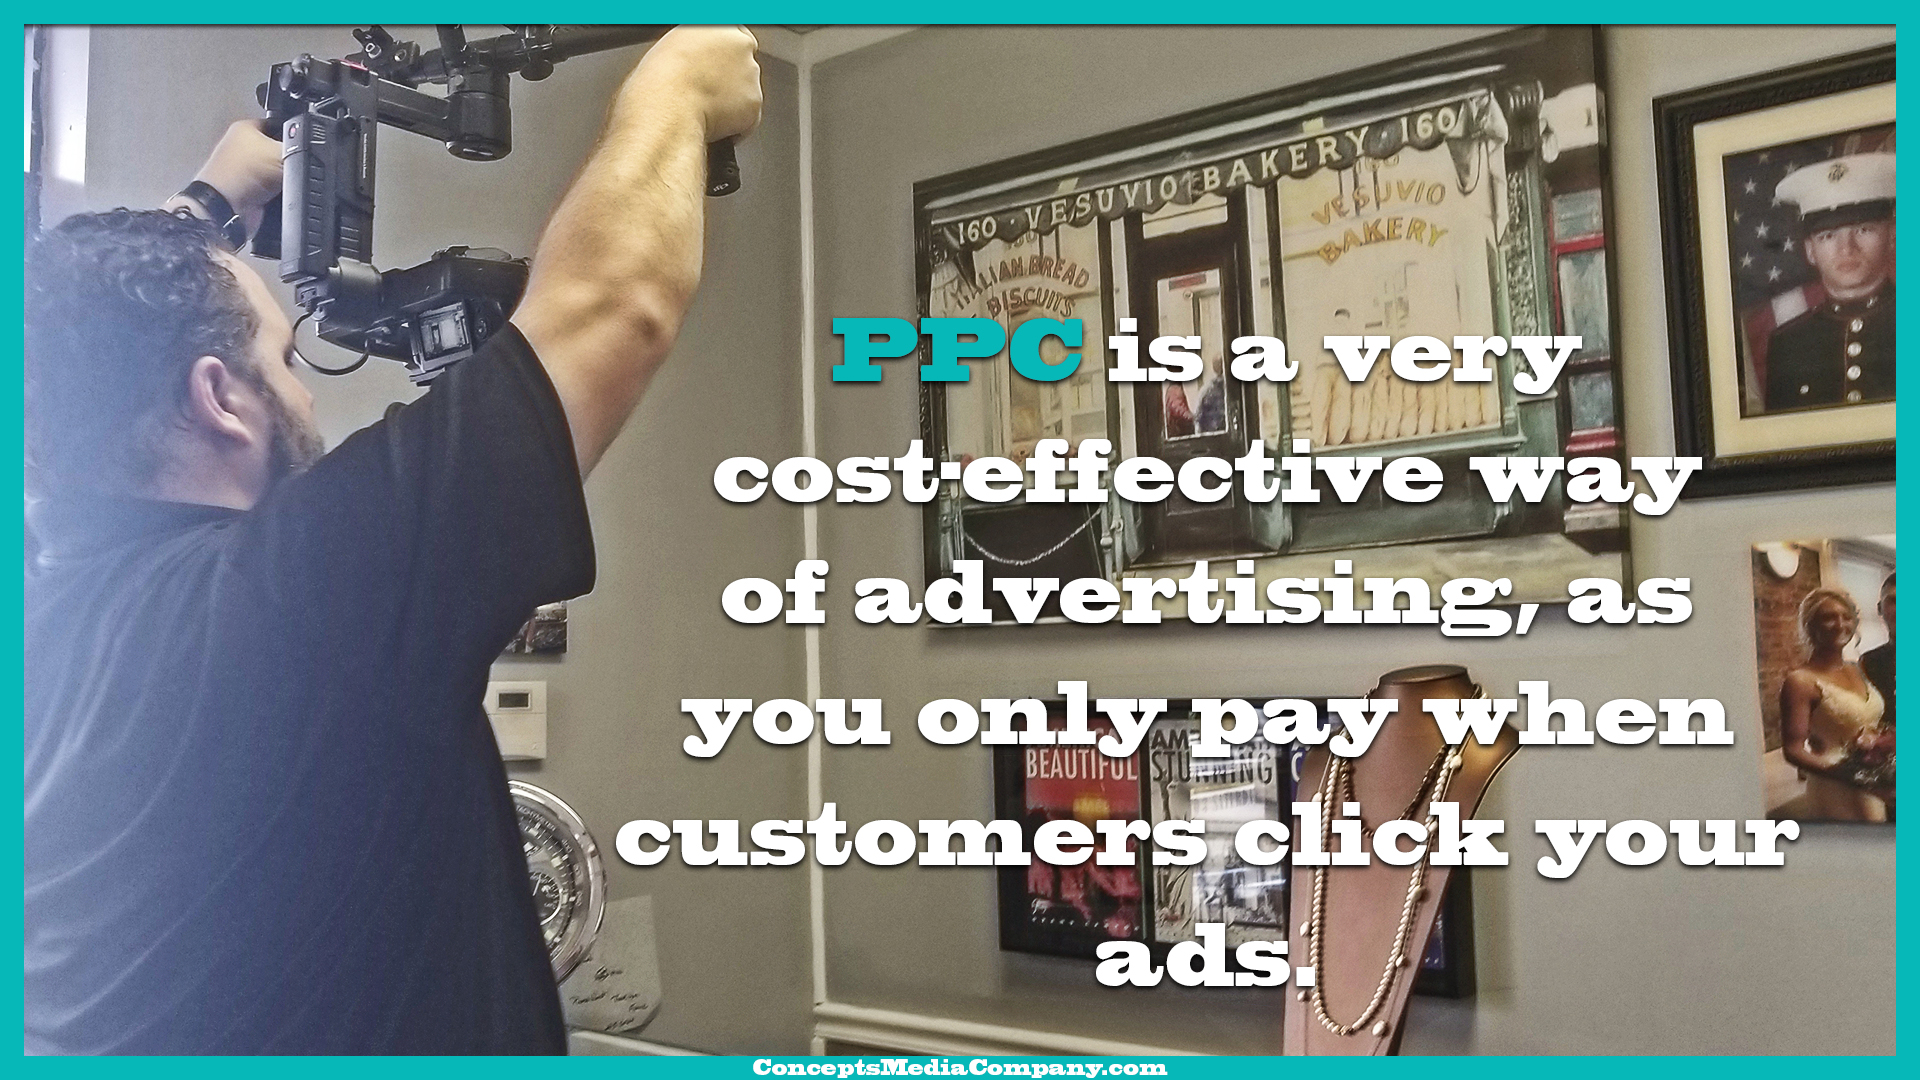 What can ppc do for your company